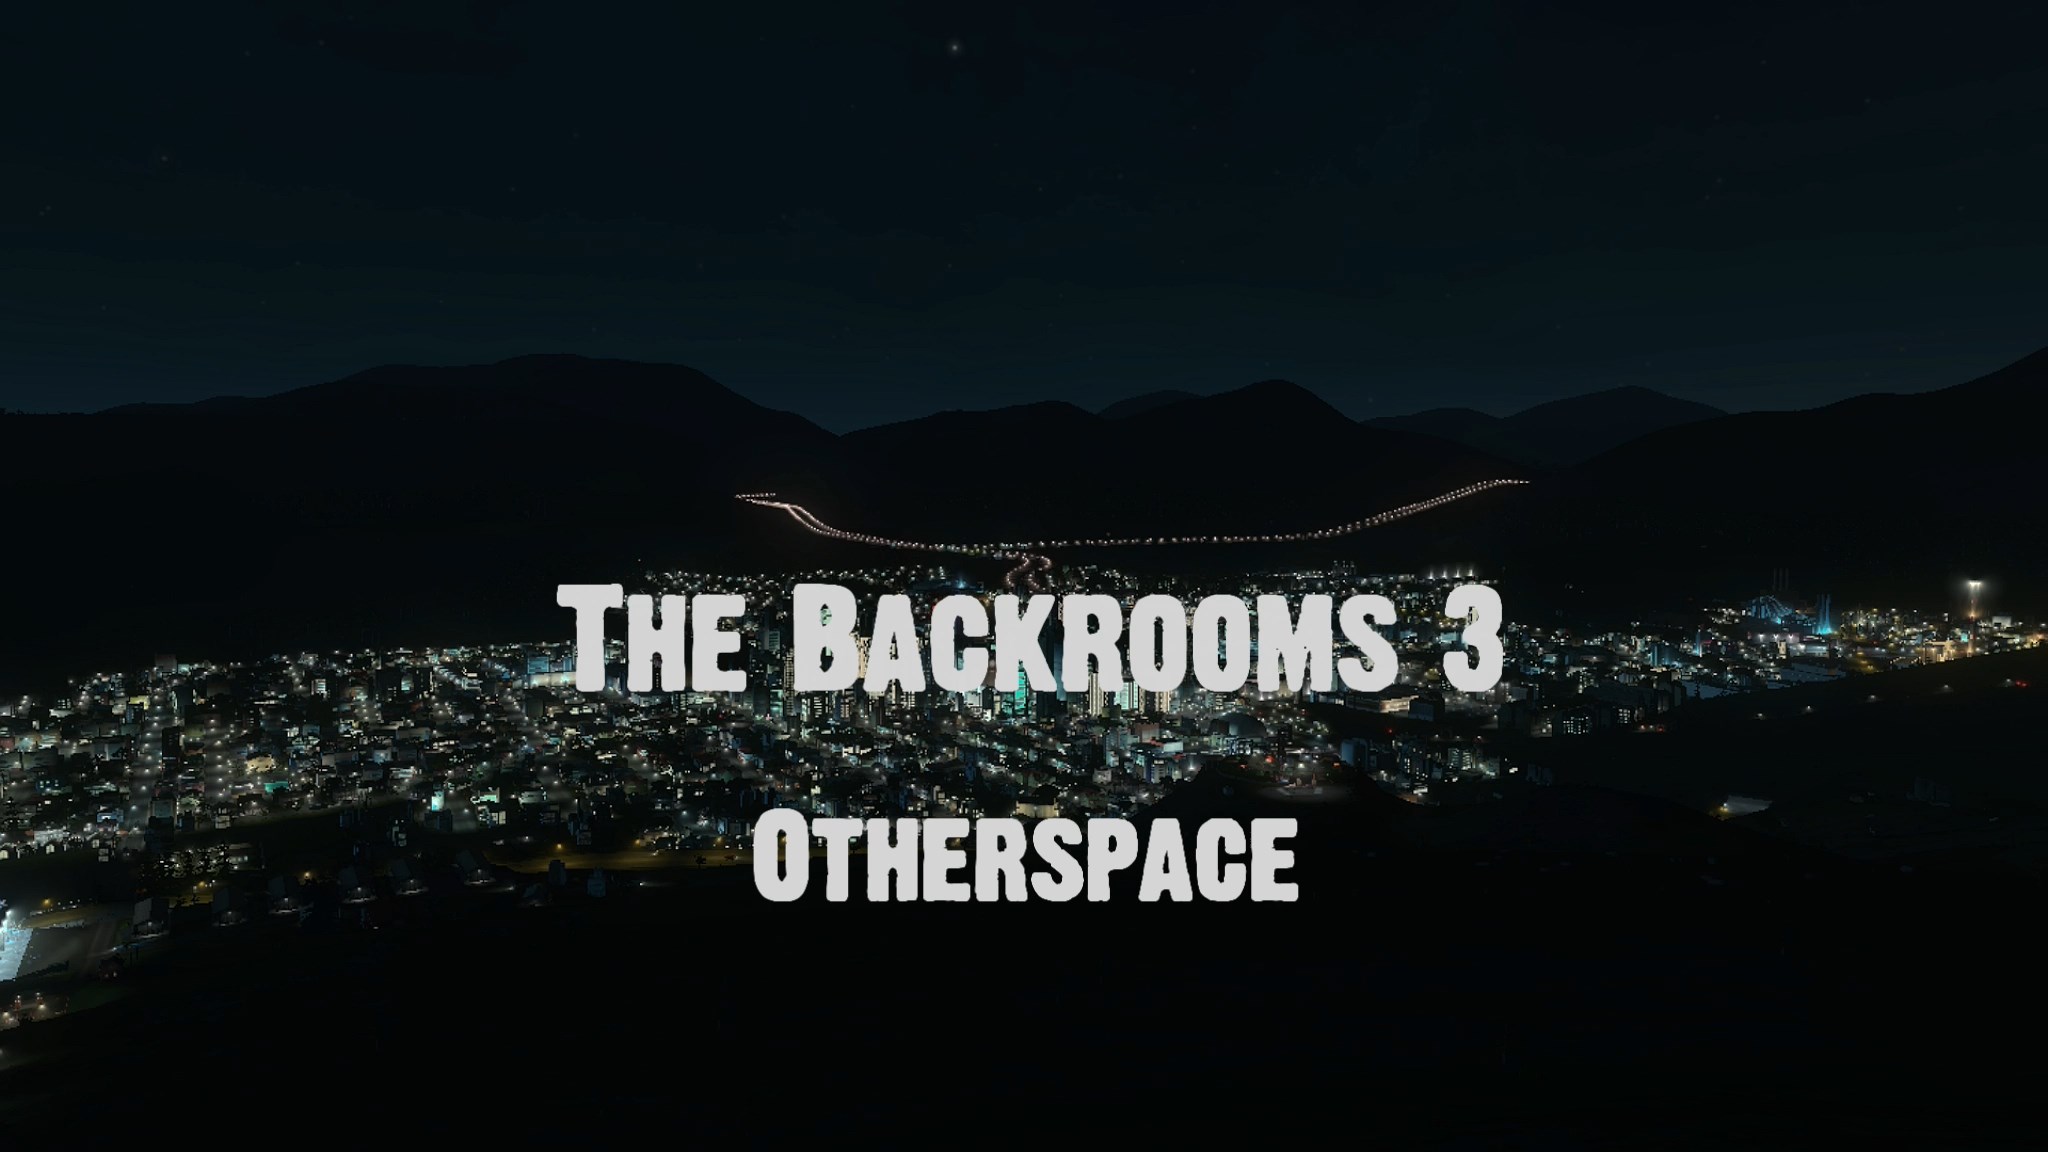 The Backrooms 3 - Otherspace